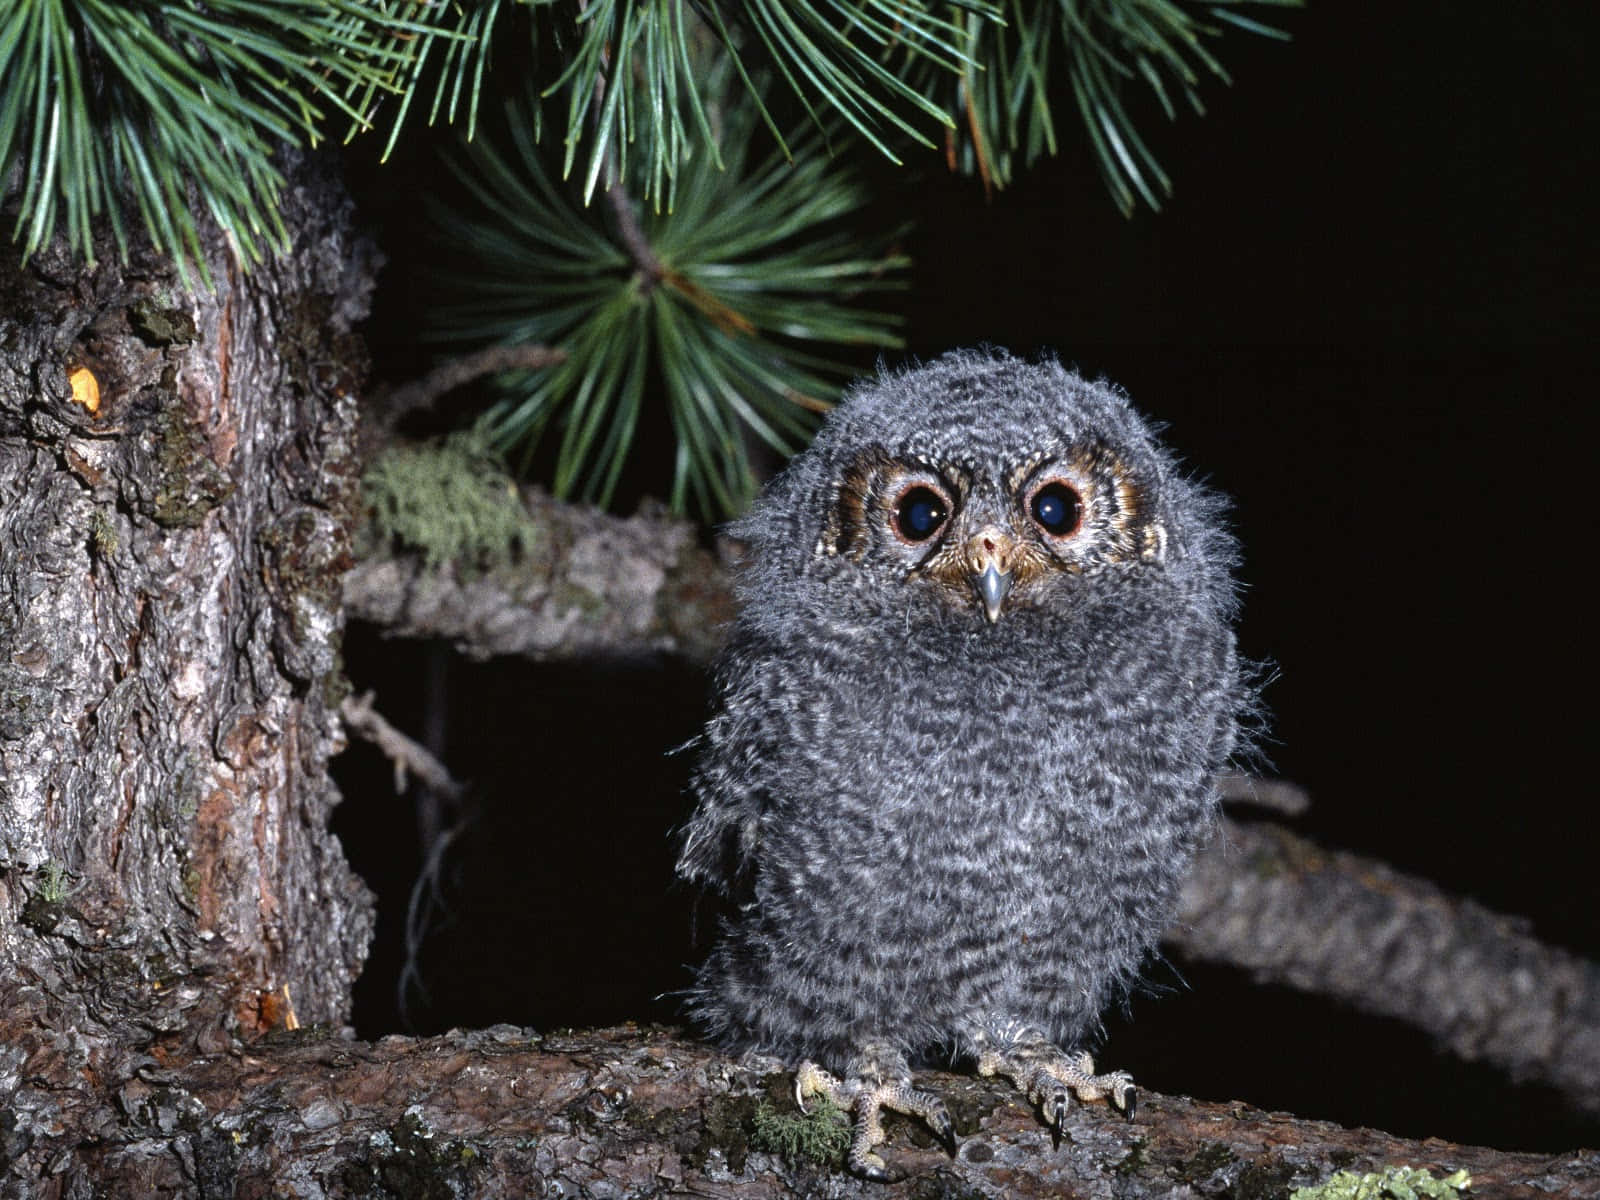 The cutest little baby owl!